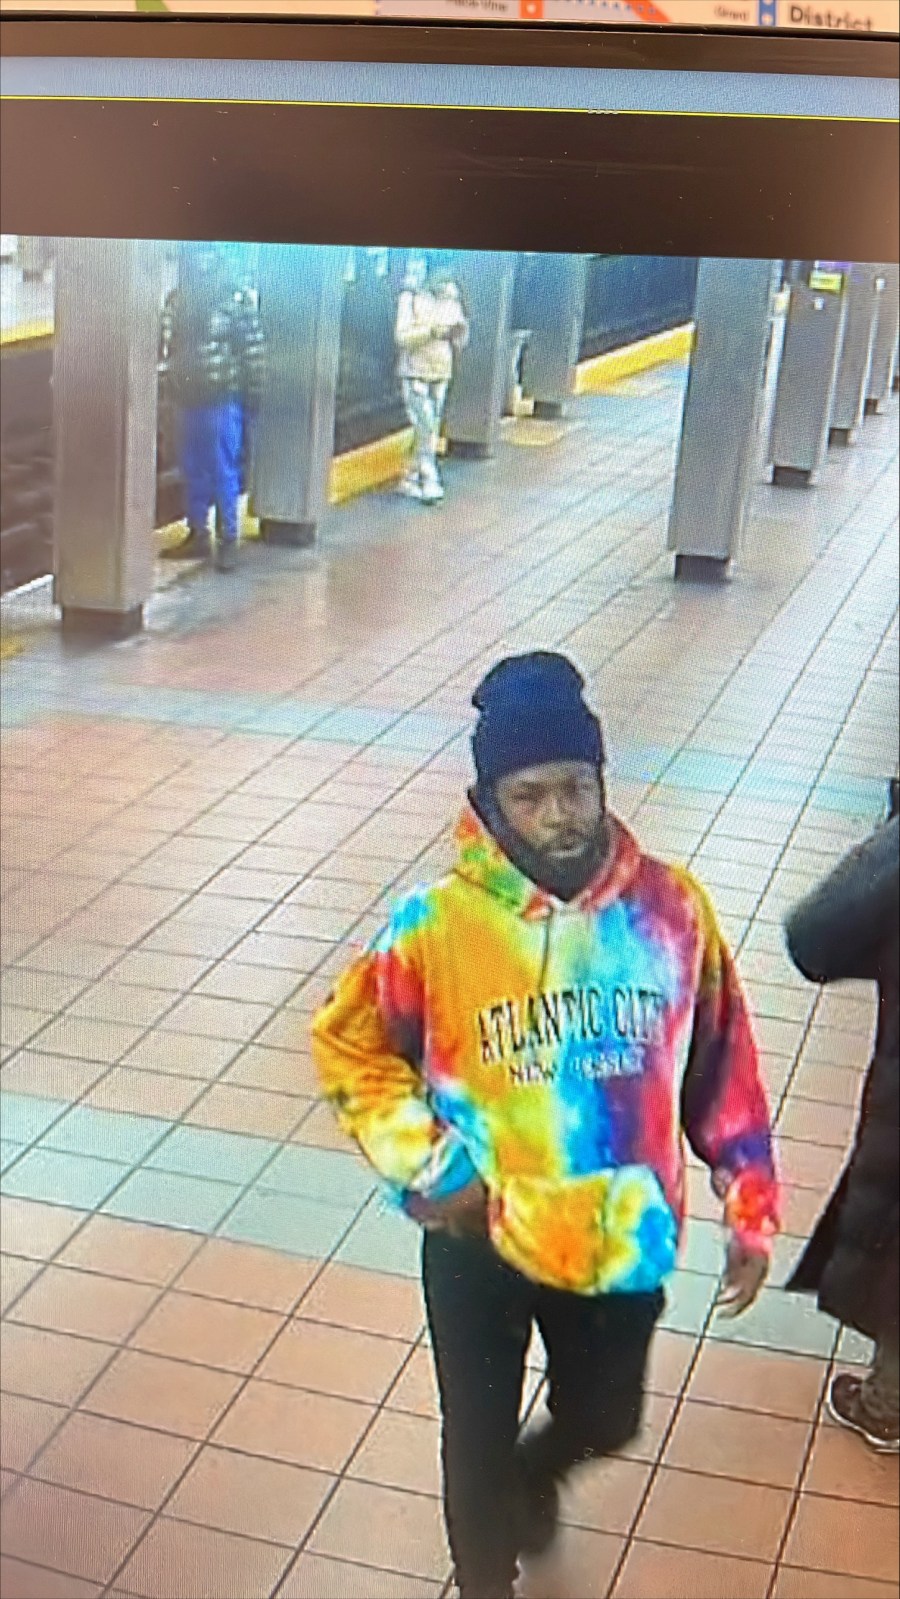 An image SEPTA released on the man sought in a shooting at the 52nd Street Station in West Philadelphia on Sunday morning.